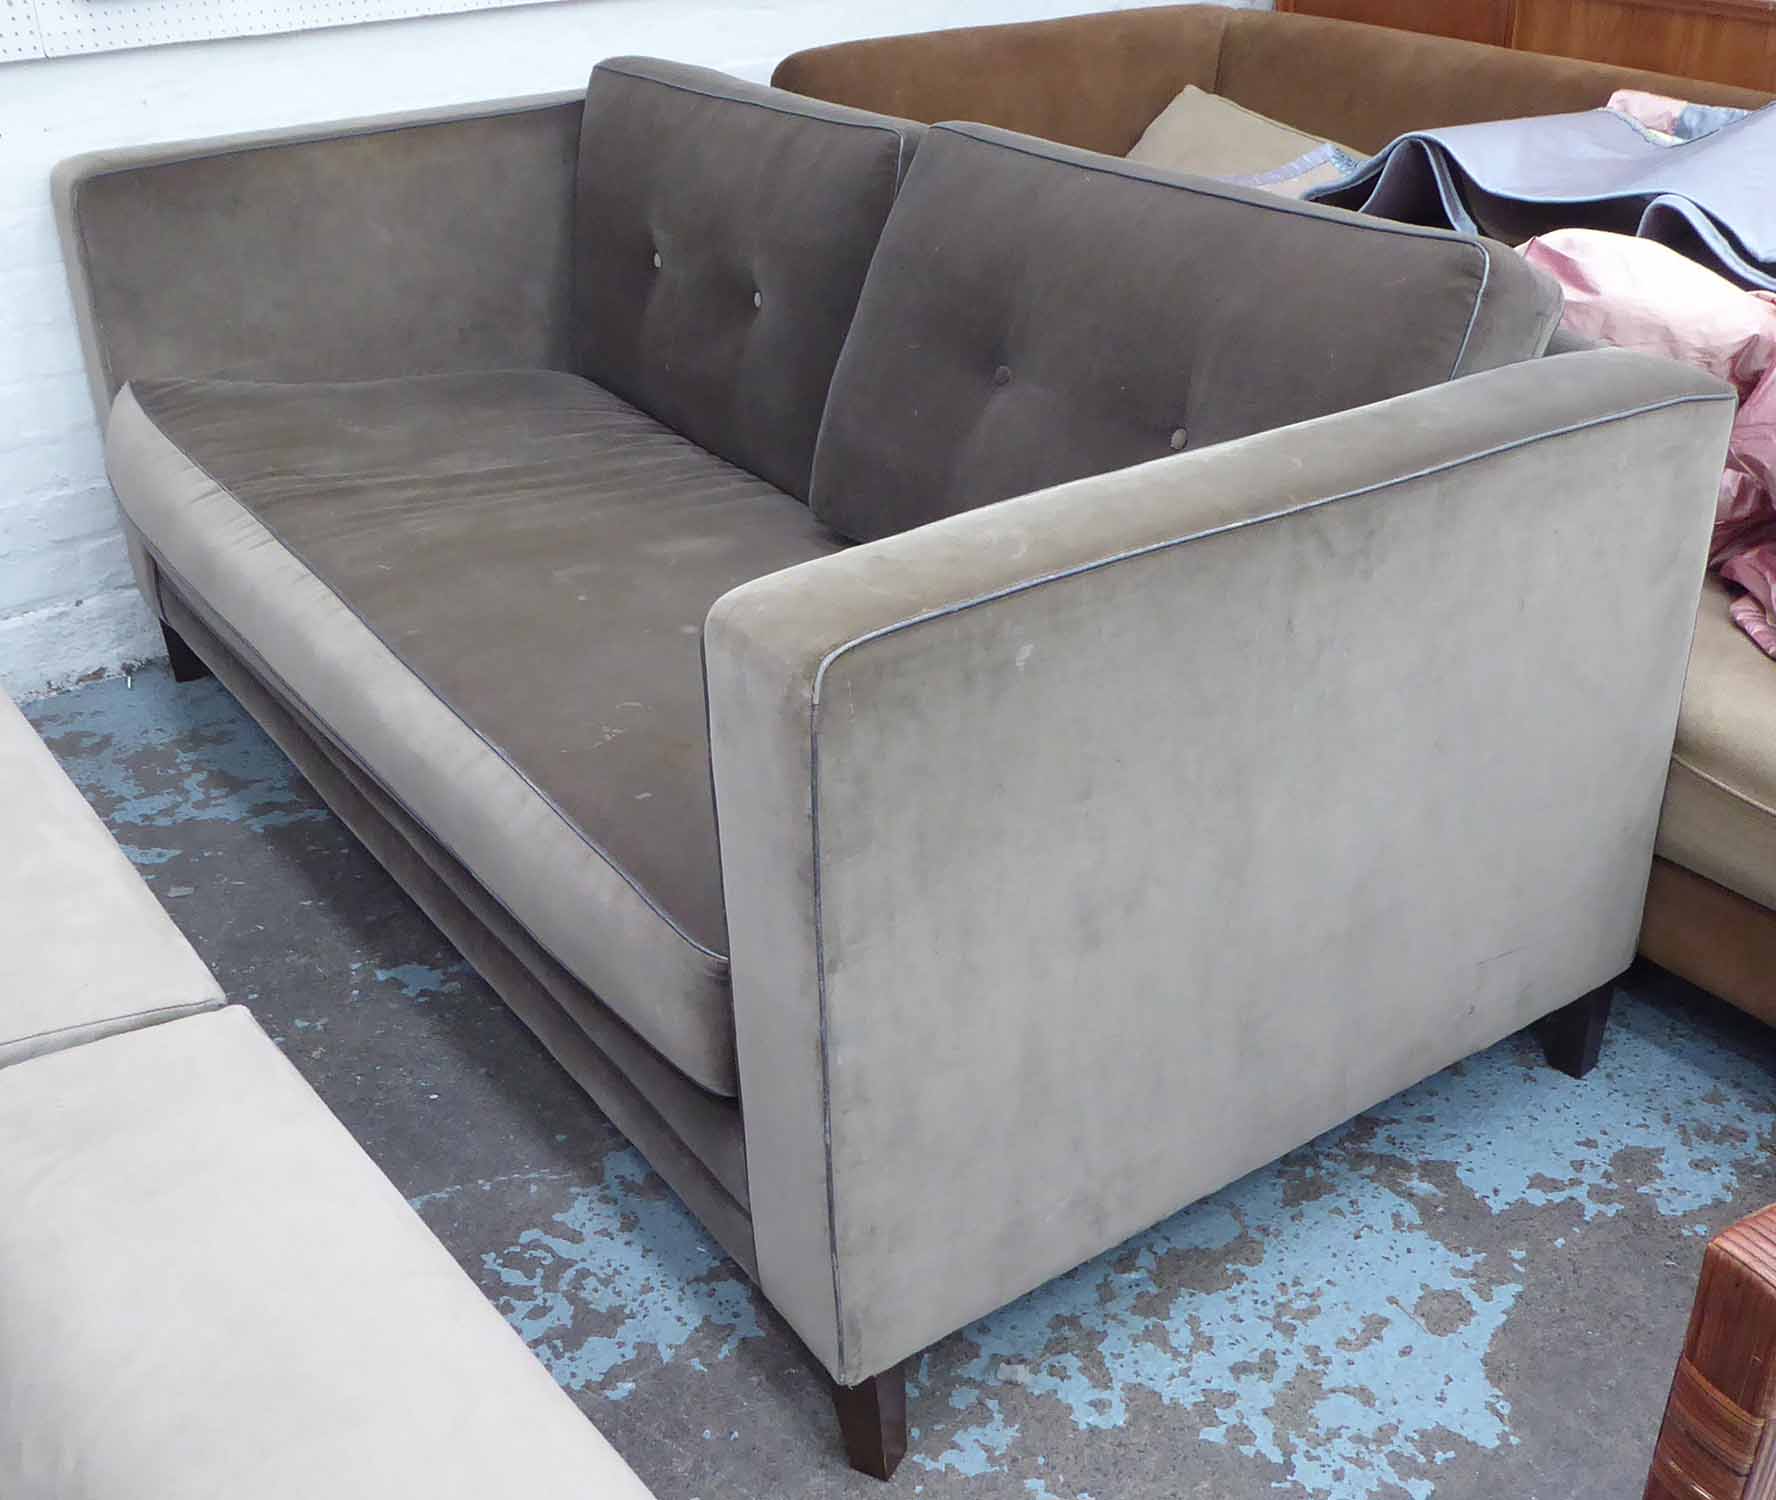 SOFA, 1960's Italian style grey velvet with piping finish and buttoned back detail, 195cm W.